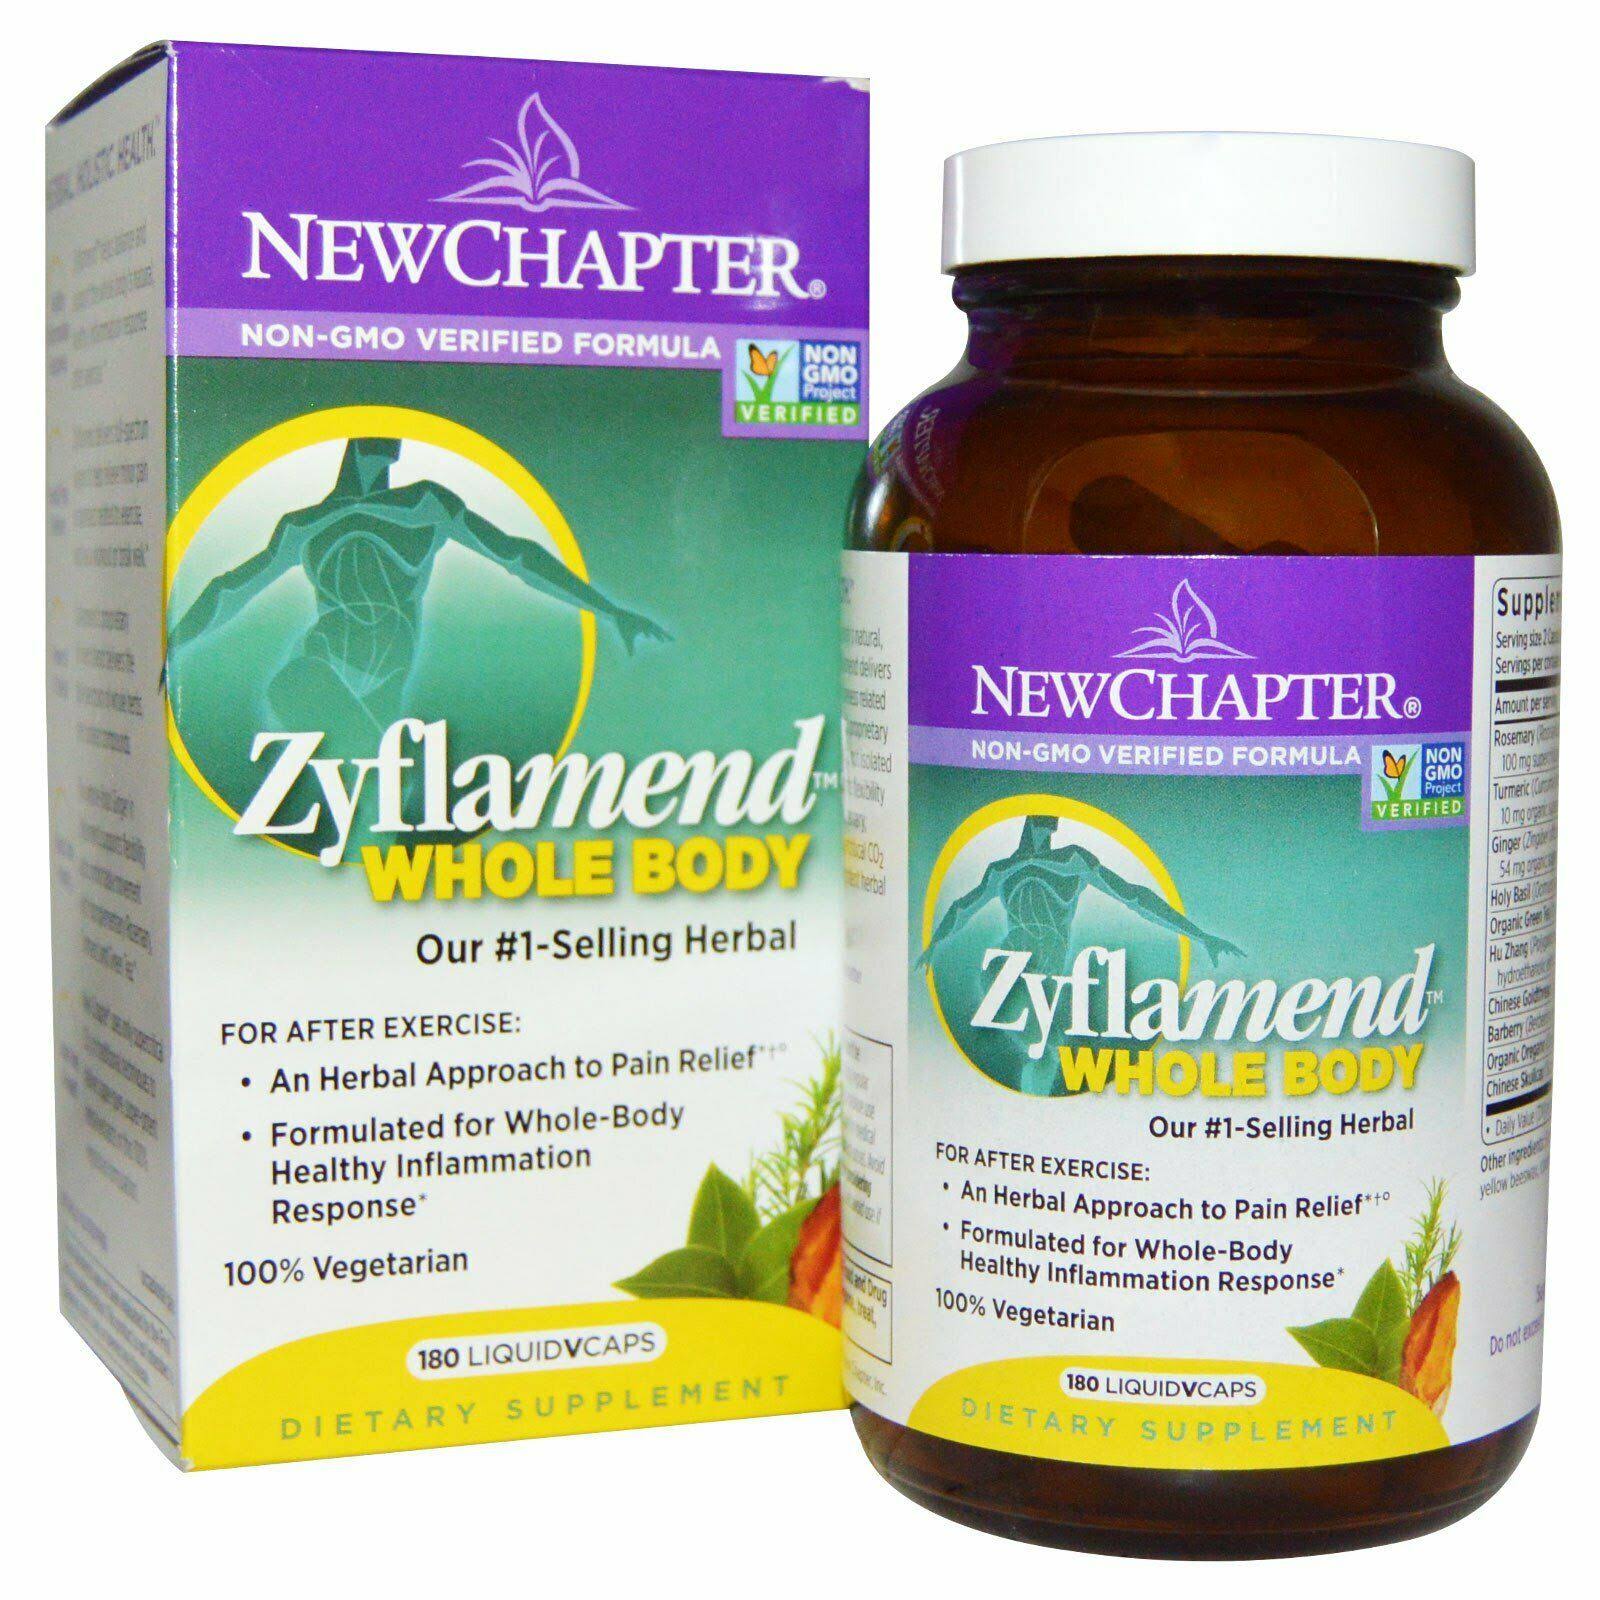 New Chapter Zyflamend Dietary Supplement